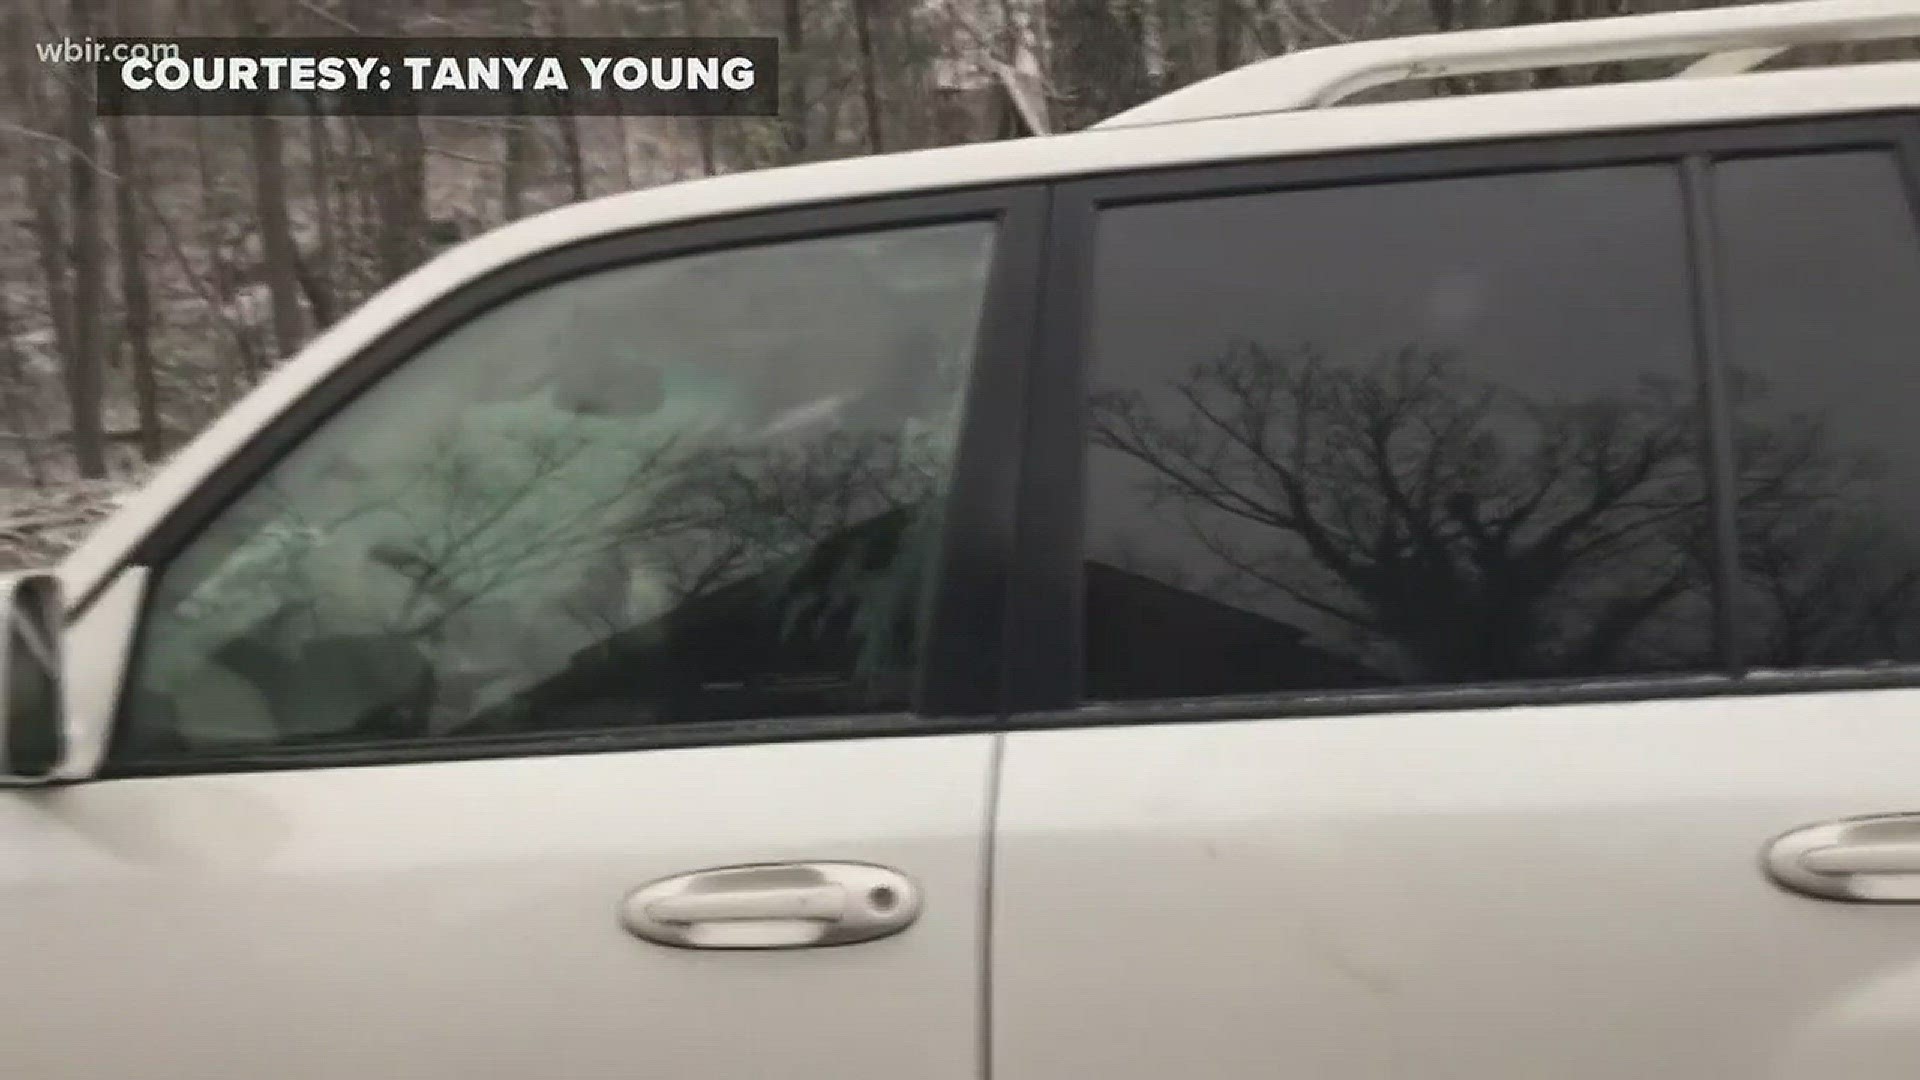 Visitors at a cabin in Gatlinburg were surprised to find a bear in their vehicle on Saturday.